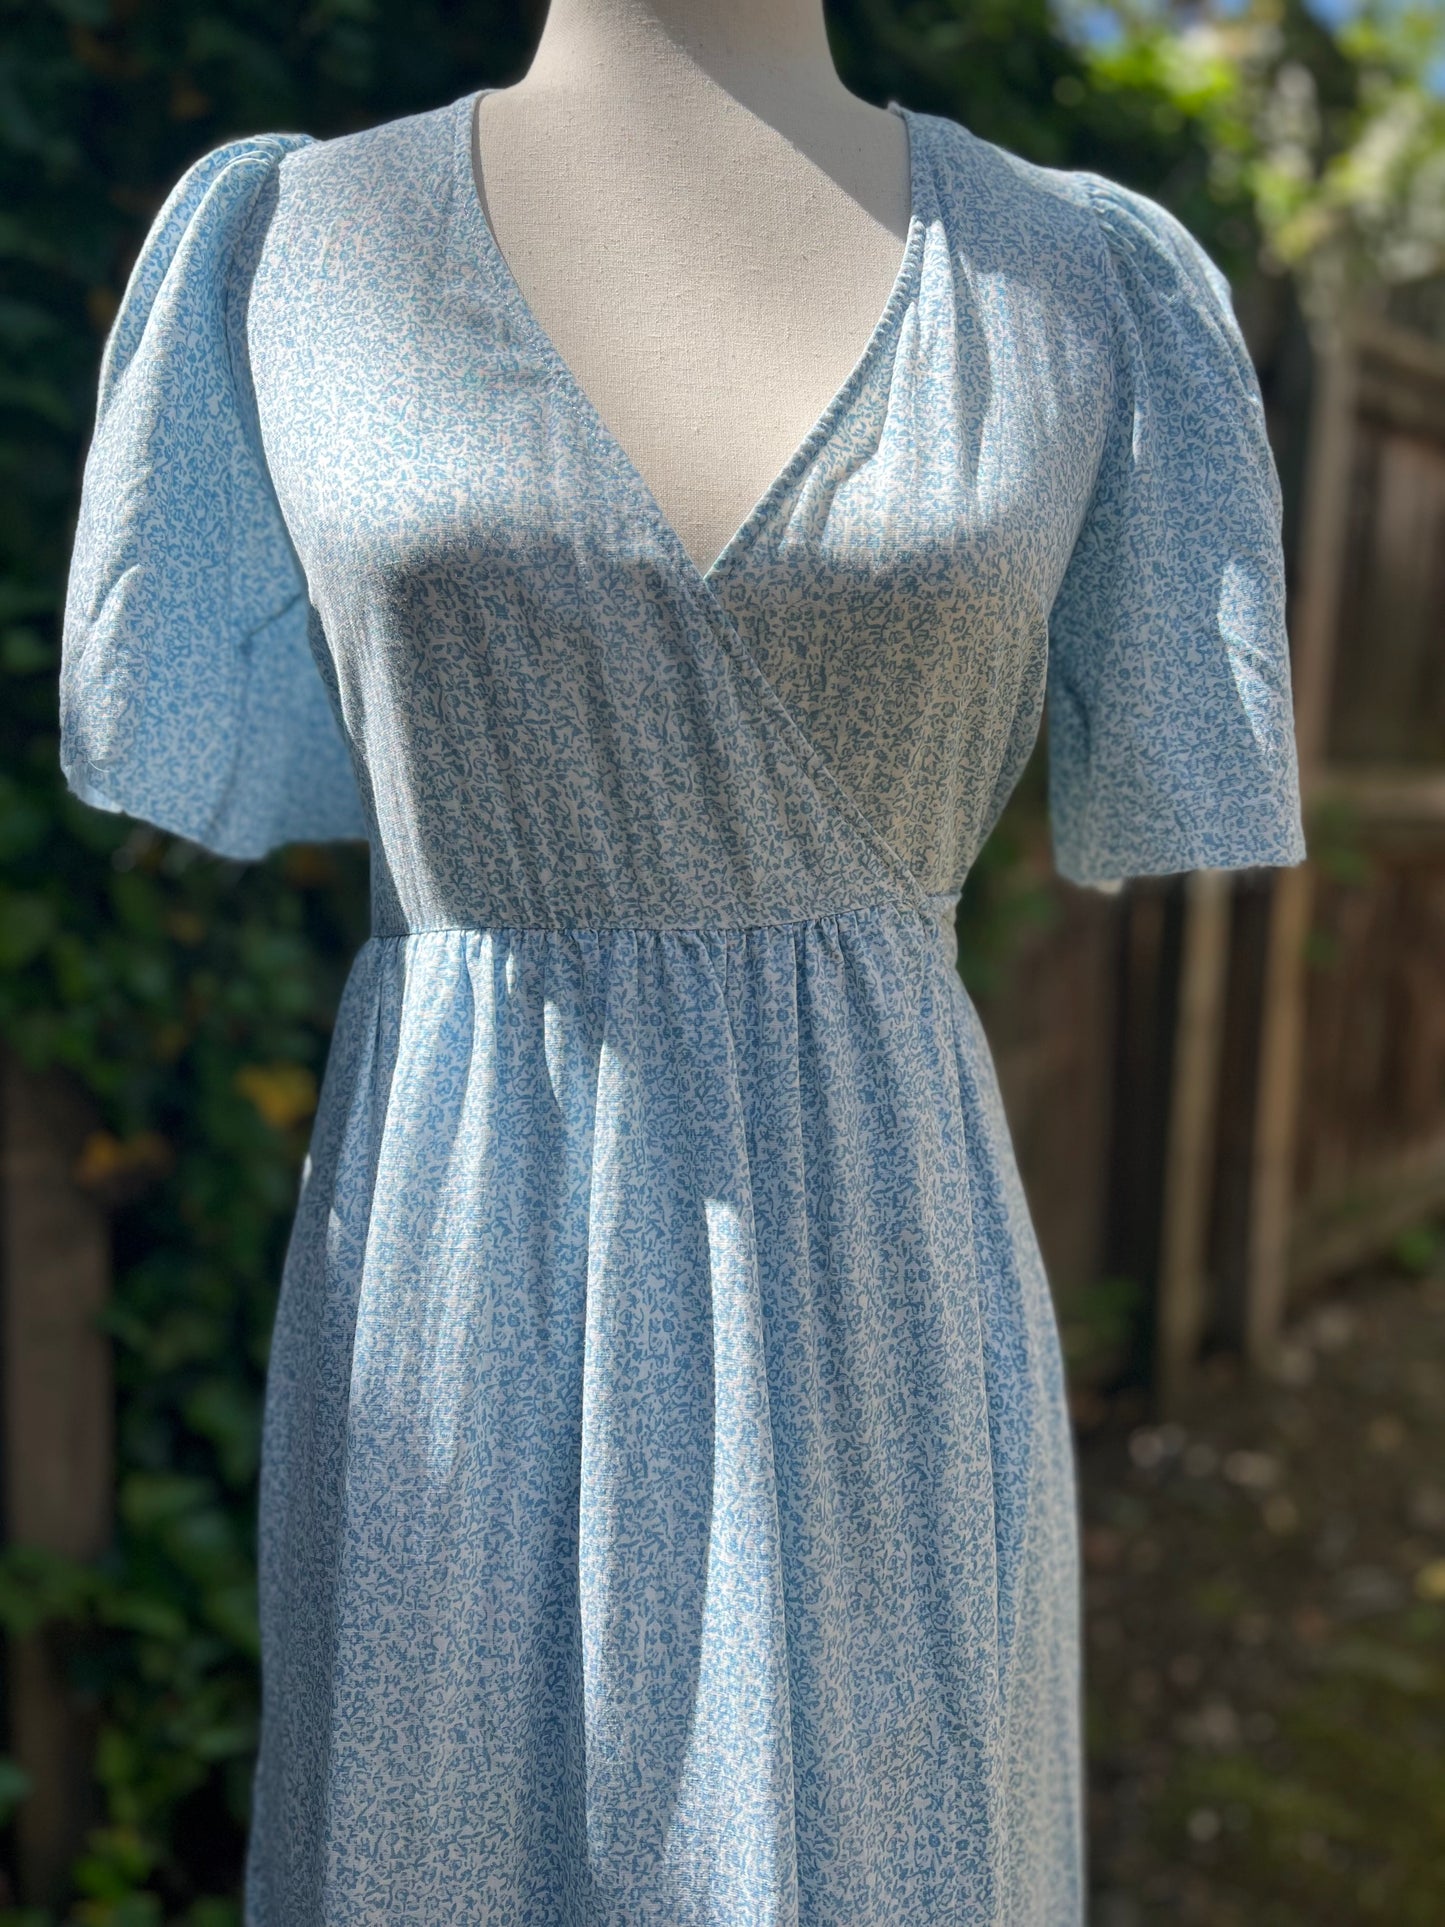 & Other Stories Baby Blue Floral Maxi Wrap Dress Size XS